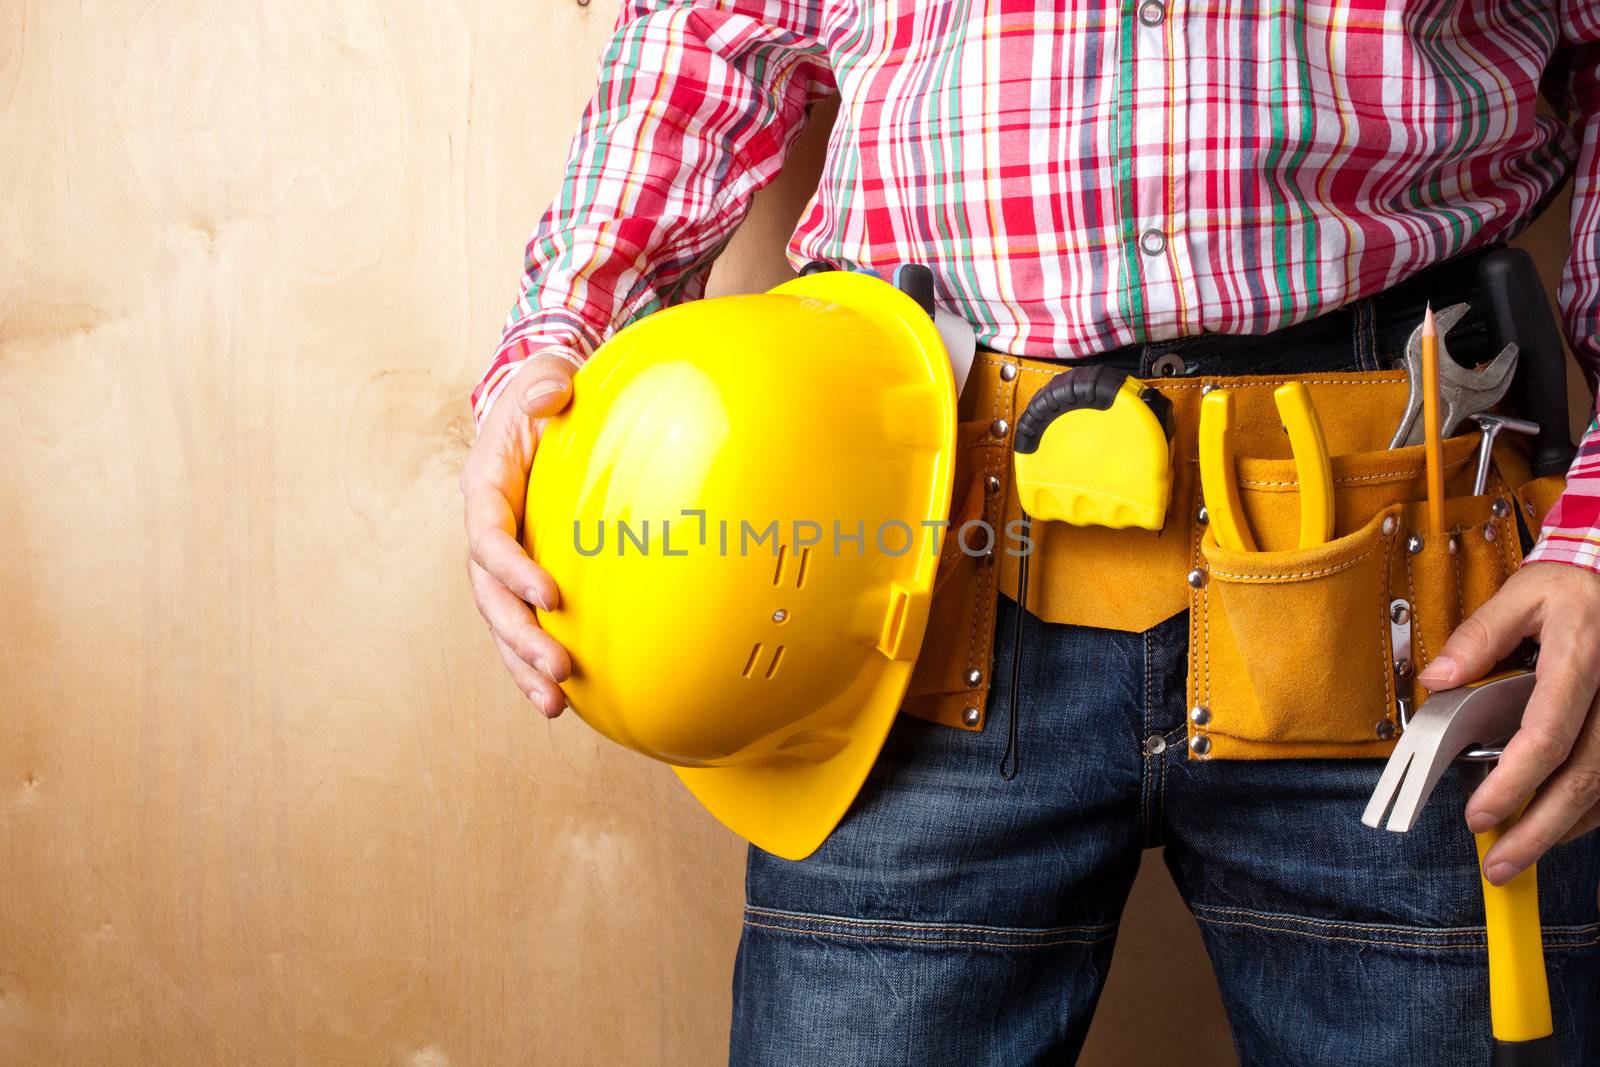 construction concept with copy-space for text or design, selective focus